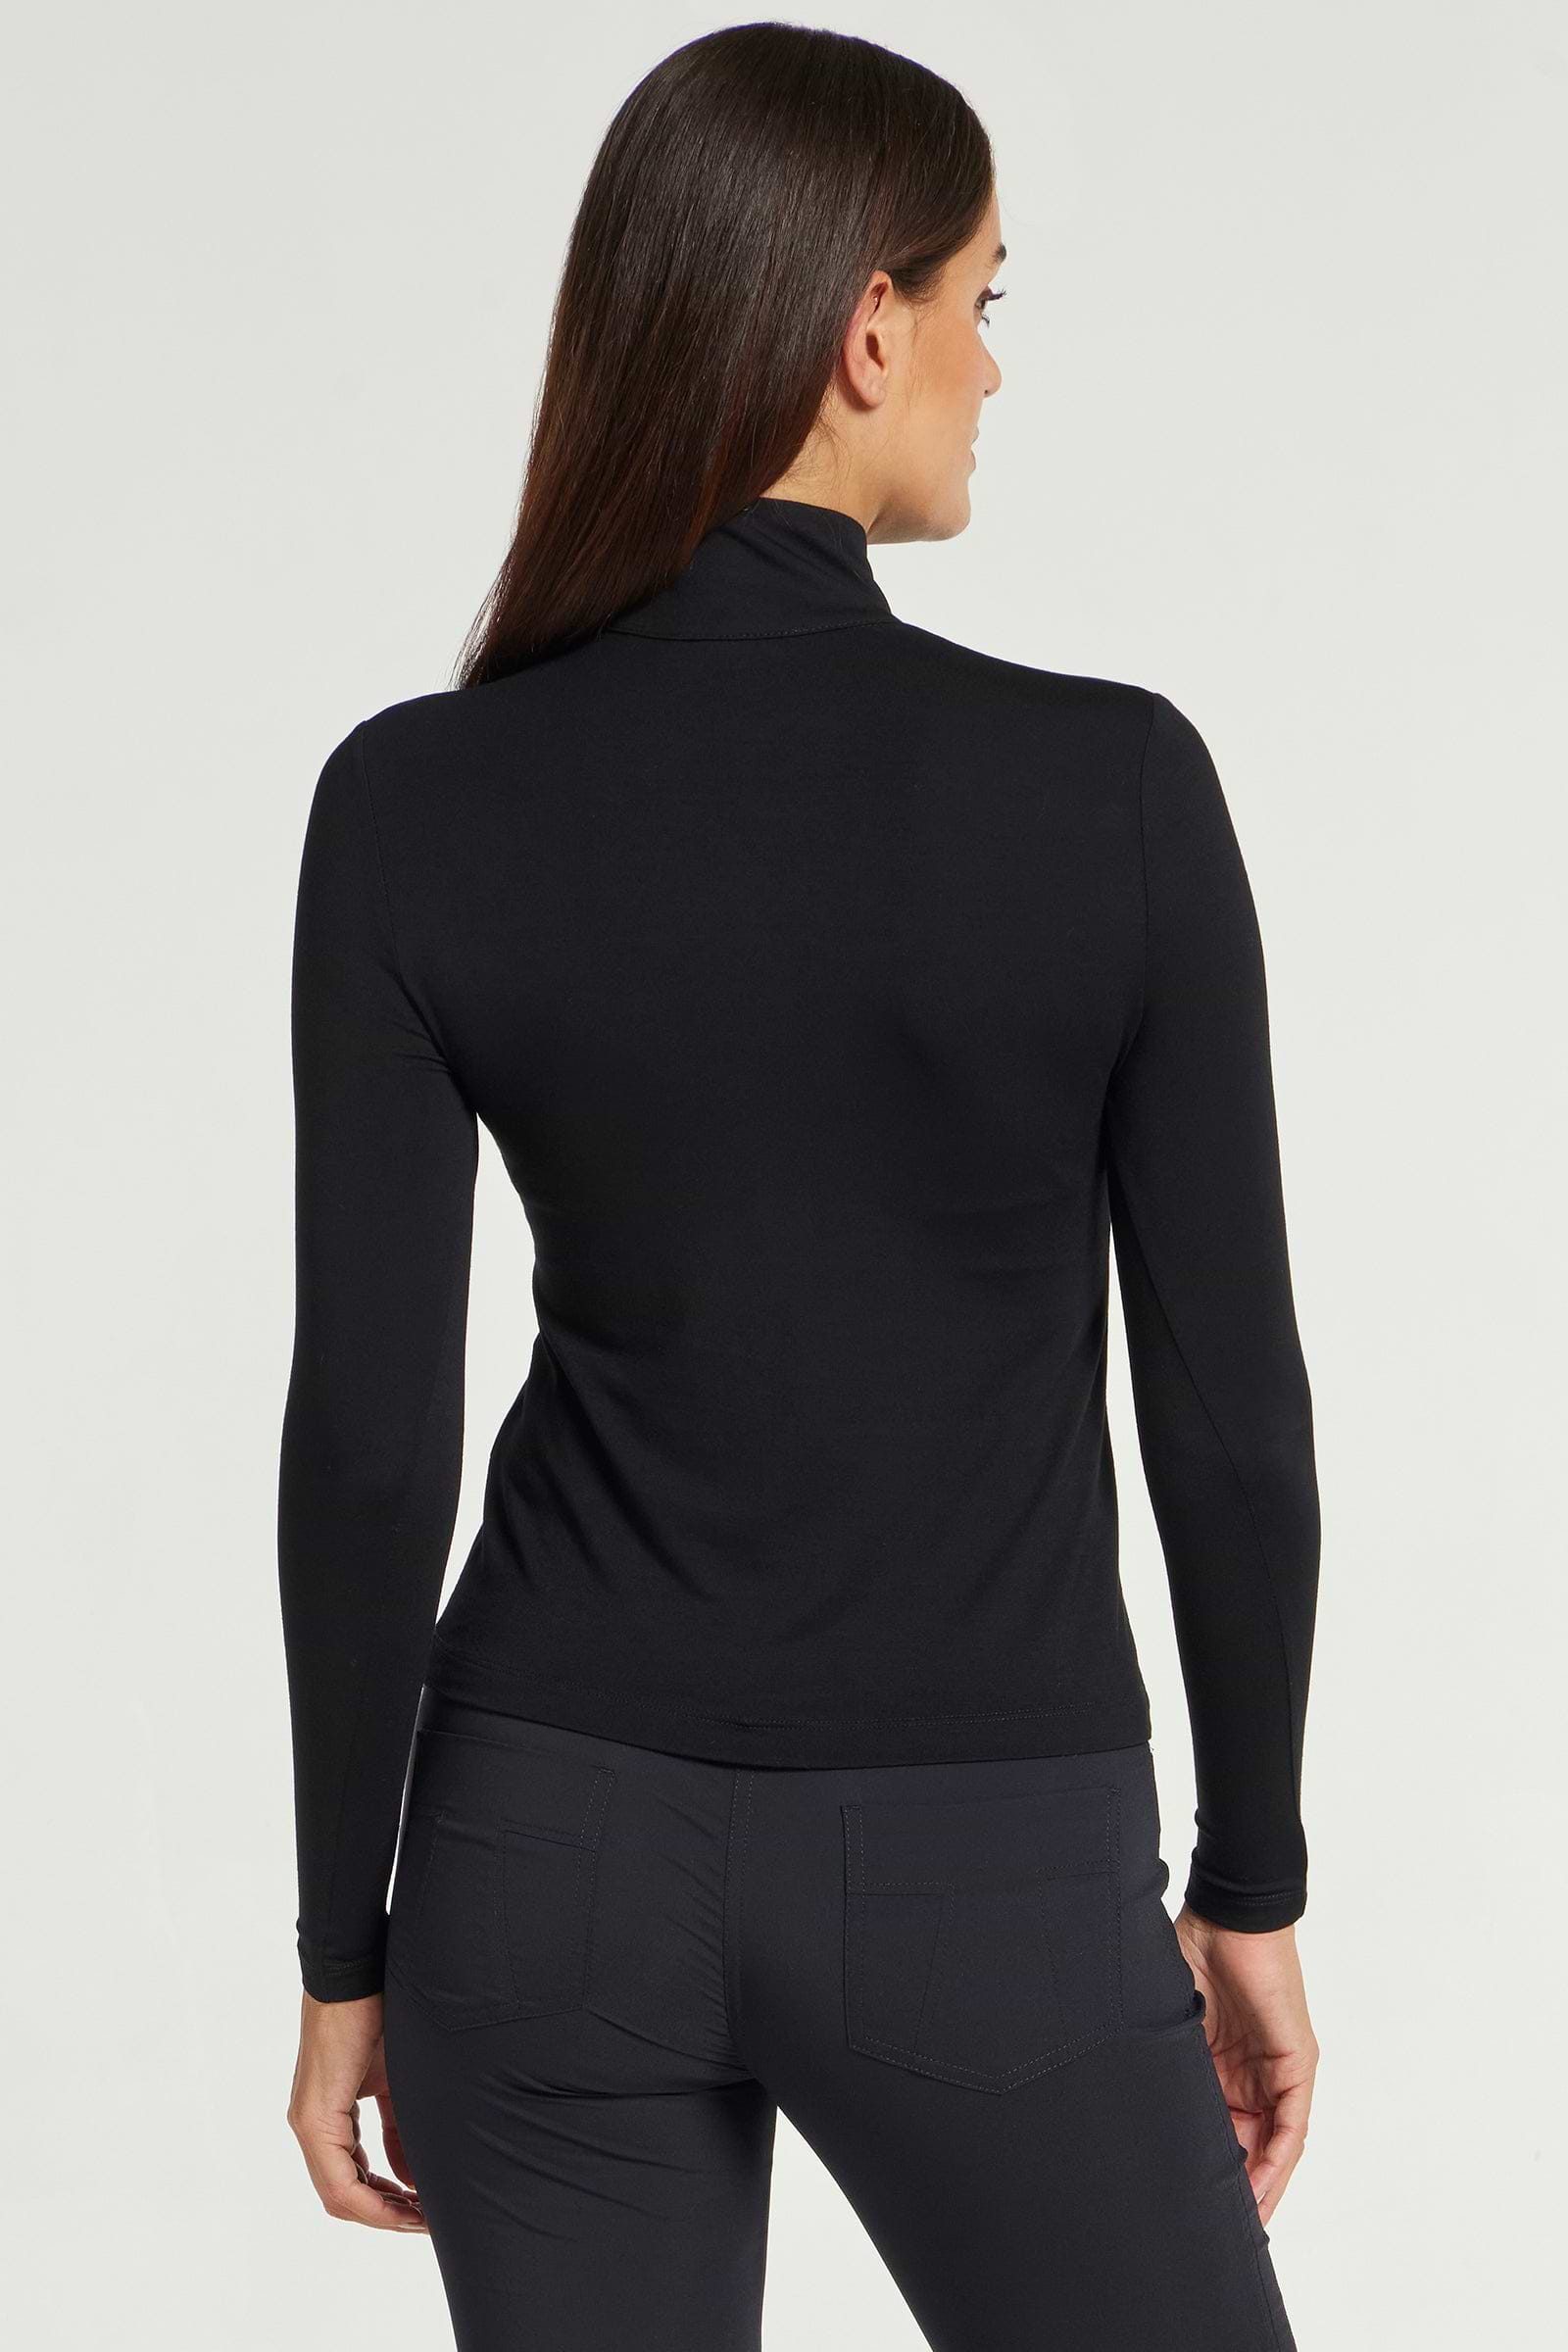 The Best Travel Top. Woman Showing the Back Profile of a Stacey Top in Black.